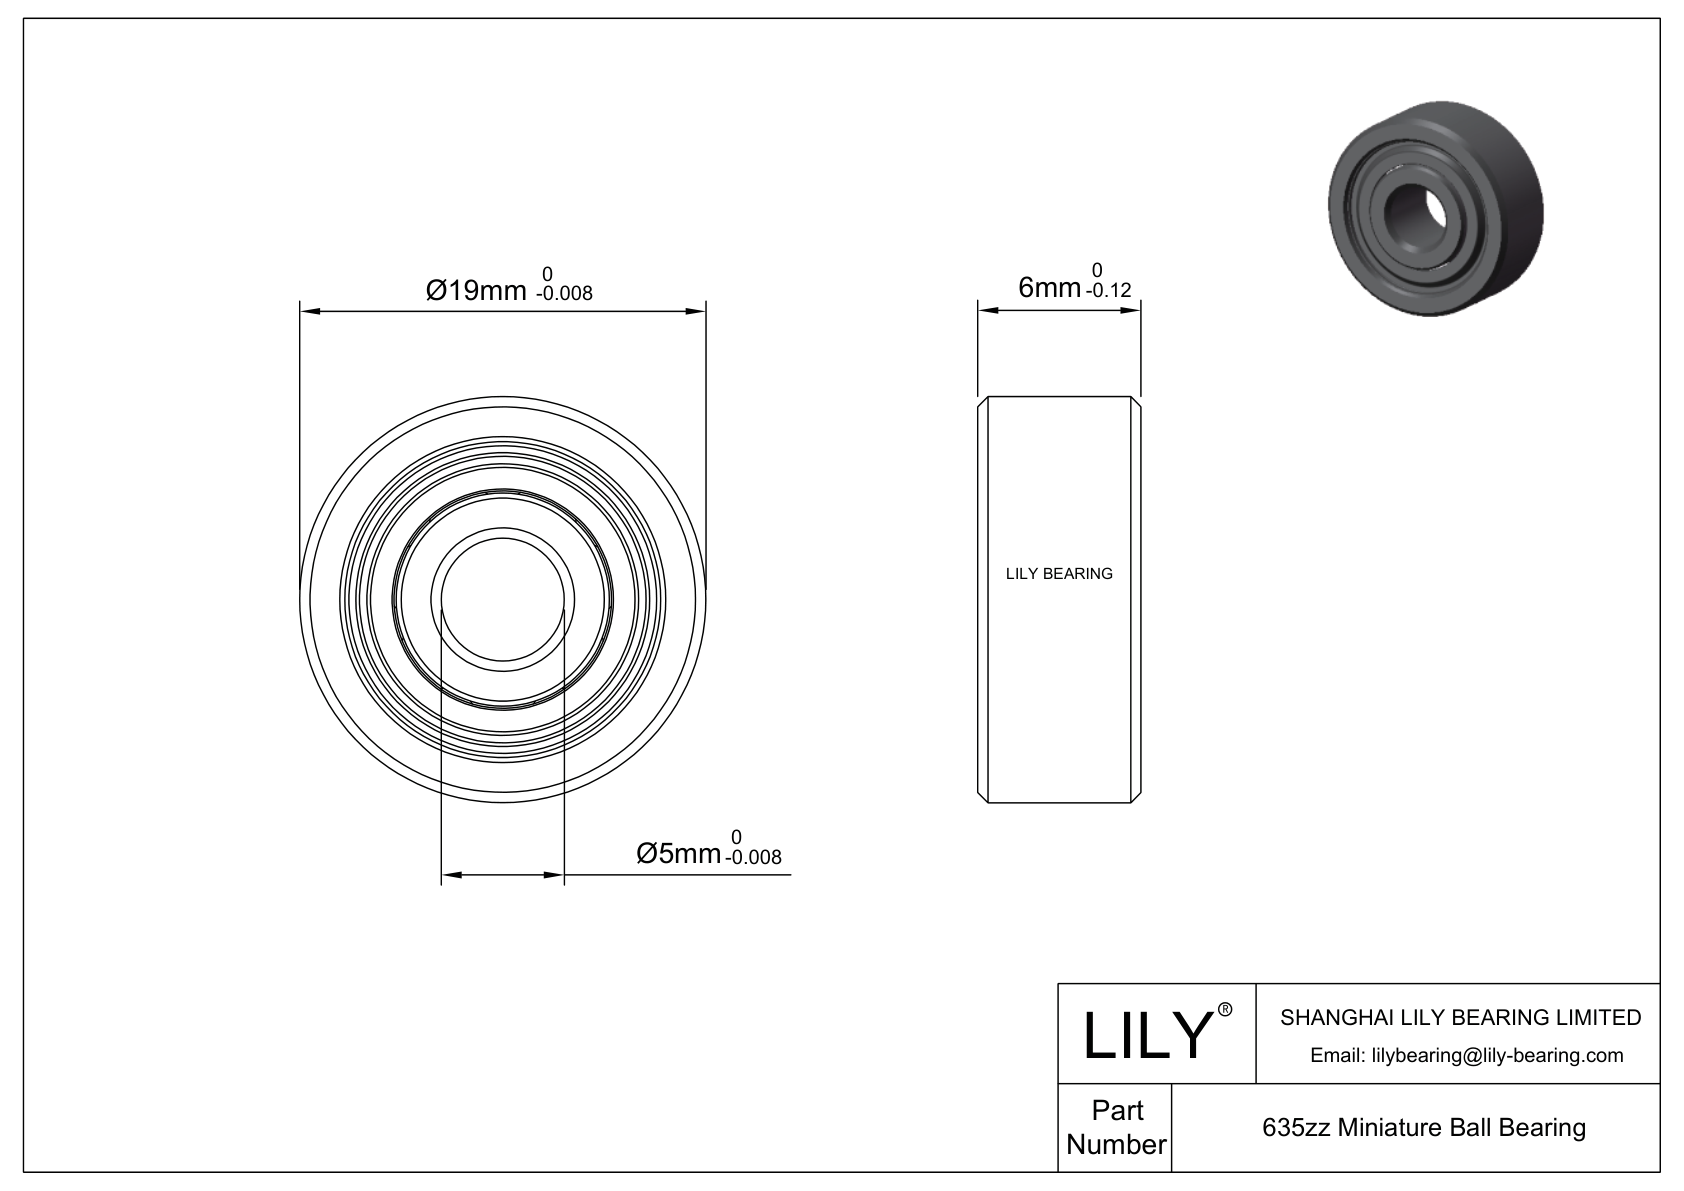 LILY-PUT63530-20 Outsourcing Polyurethane bearings cad drawing